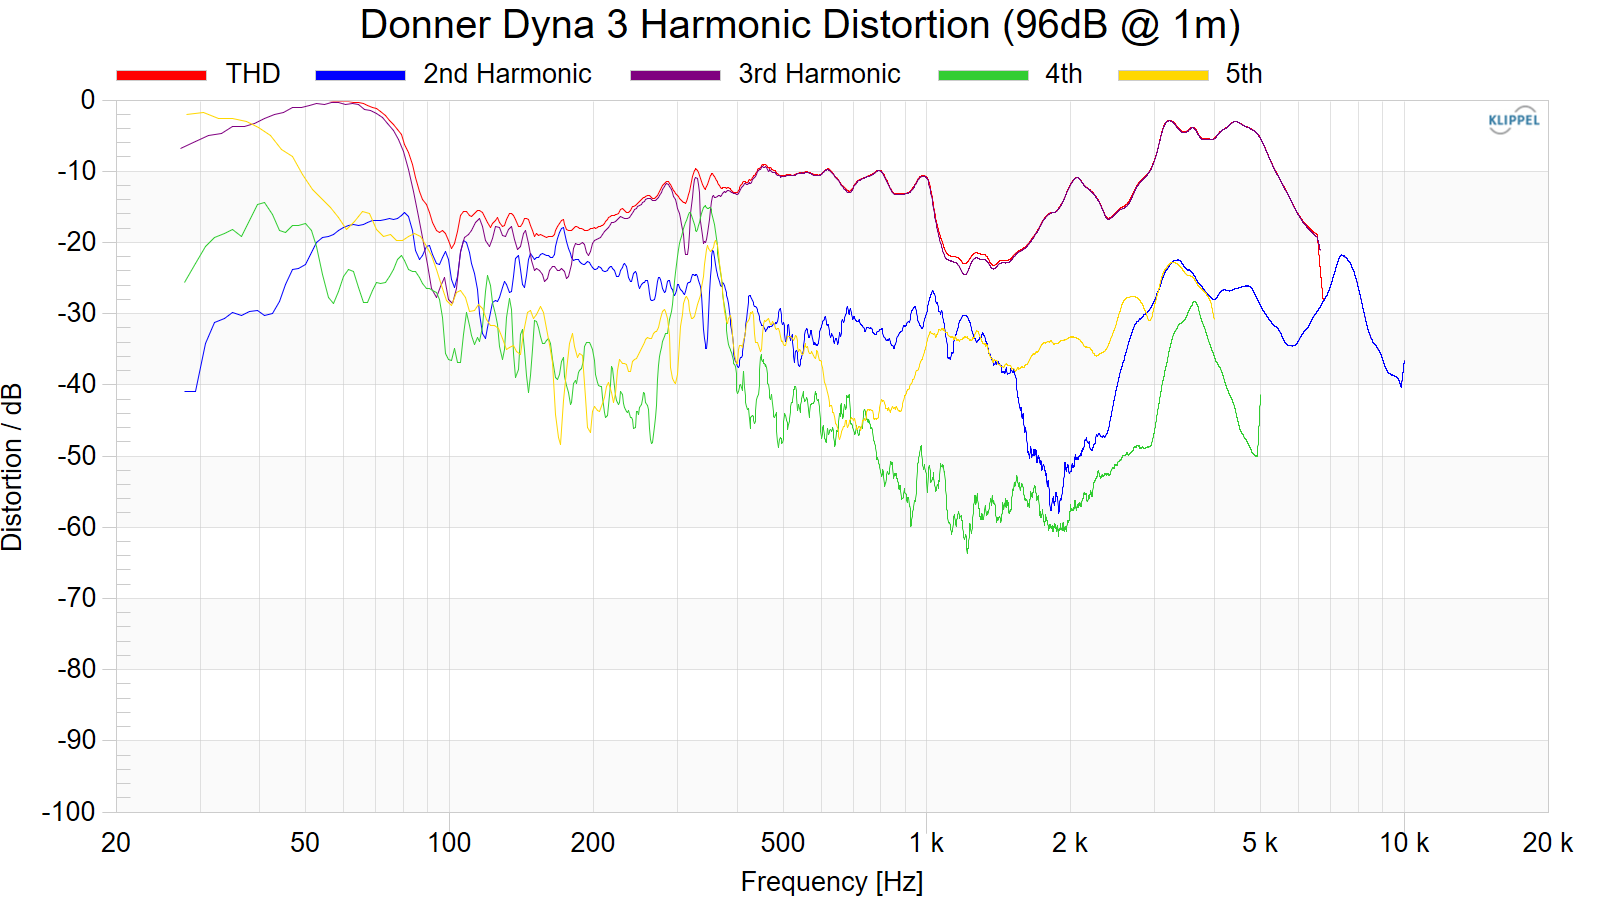 Donner%20Dyna%203%20Harmonic%20Distortion%20%2896dB%20%40%201m%29.png